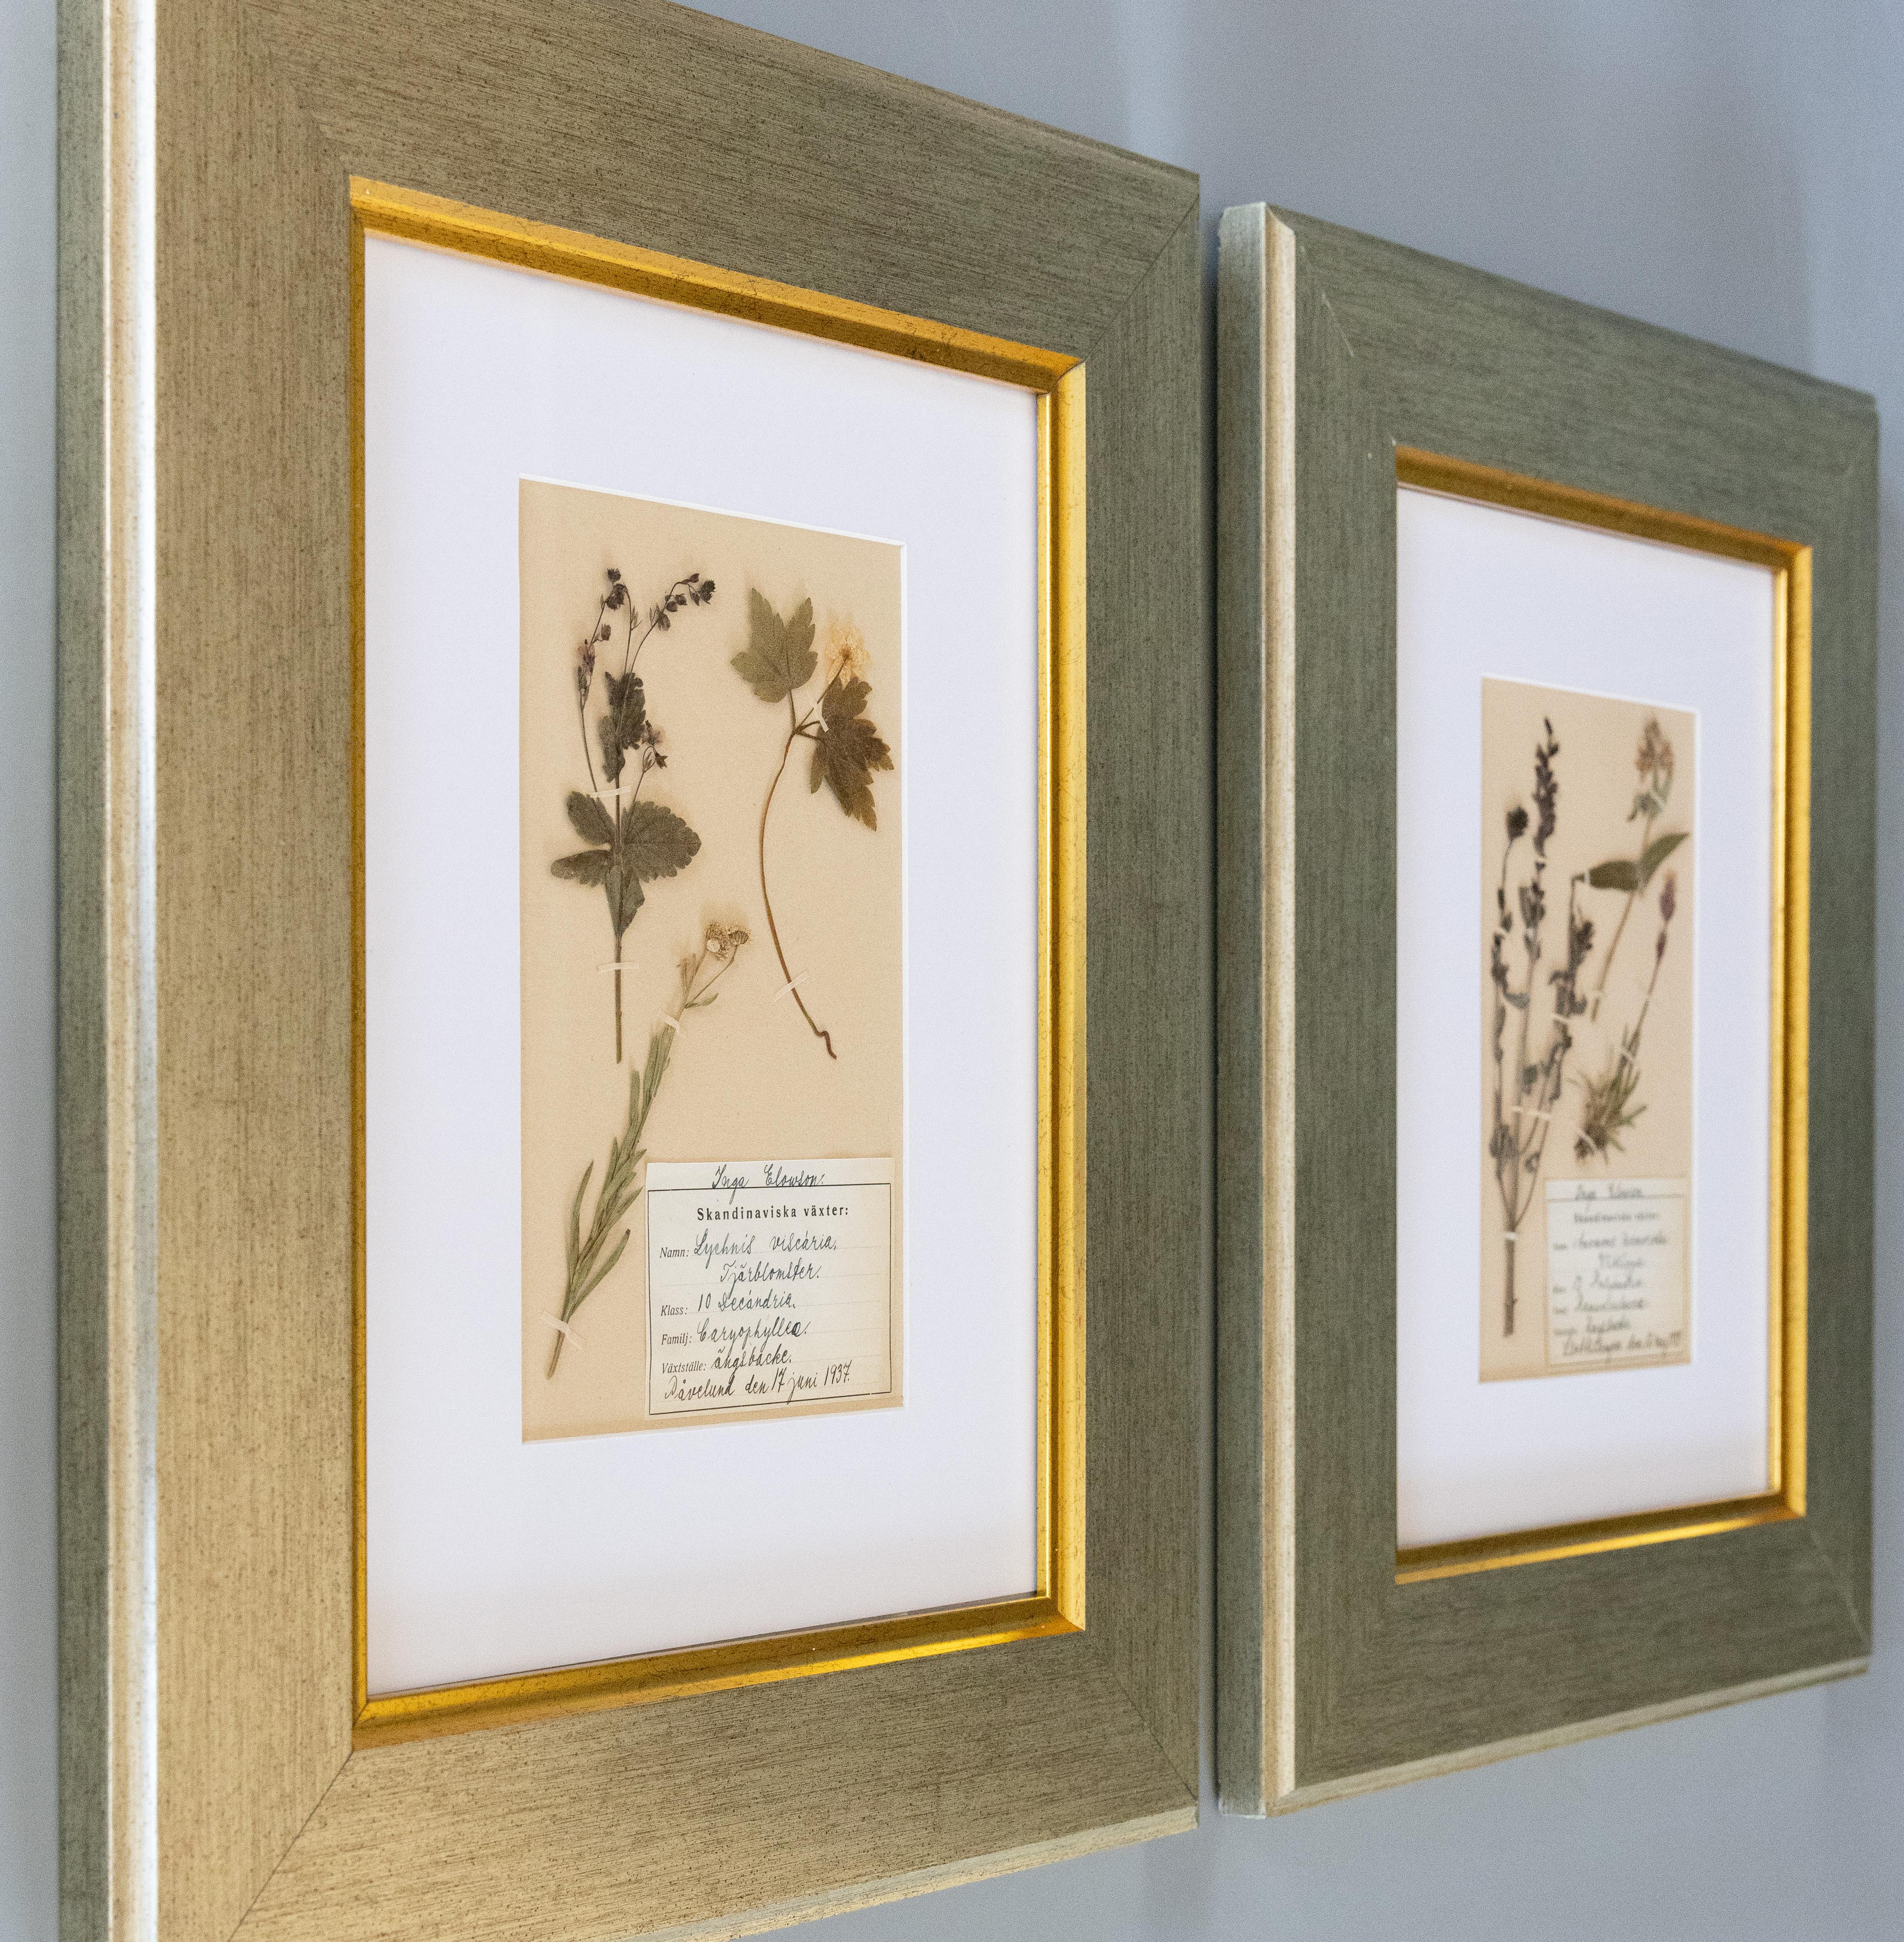 Wonderful custom framed antique herbarium floral specimens, collected in 1937. Handwritten scientific and common names in both Dutch and Latin. Lovely script. Original owner's name on specimen label. Presented in beautiful frames with tones of